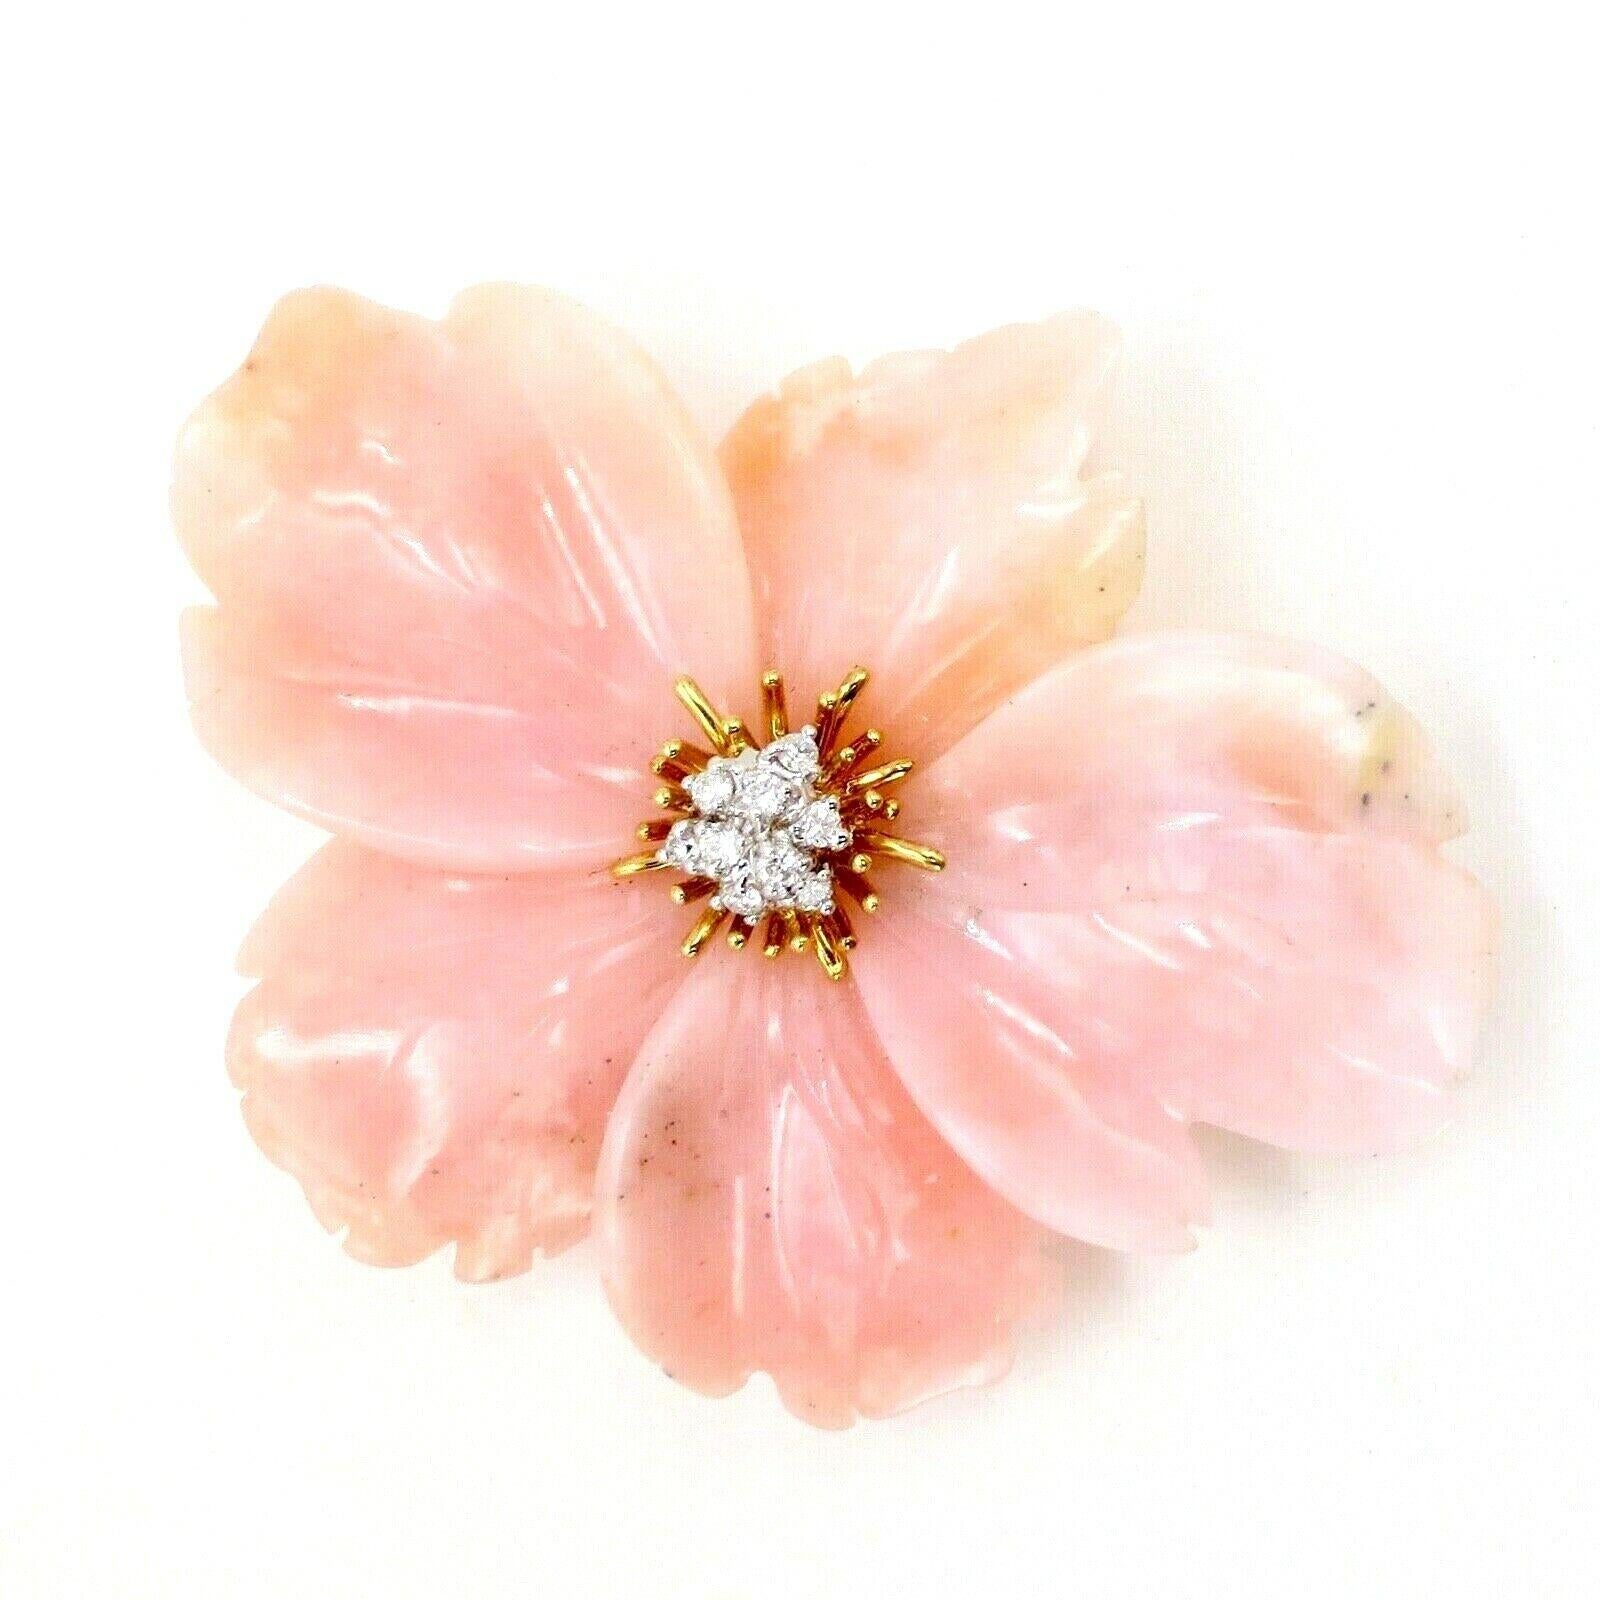 Estate, beautifully hand made Coral and Diamond Flower brooch in 18K yellow gold.

This meticulously crafted brooch and pendant is design as a hand carved in blush pink coral five petals flower, centered with 9 round brilliant cut diamonds in subtly